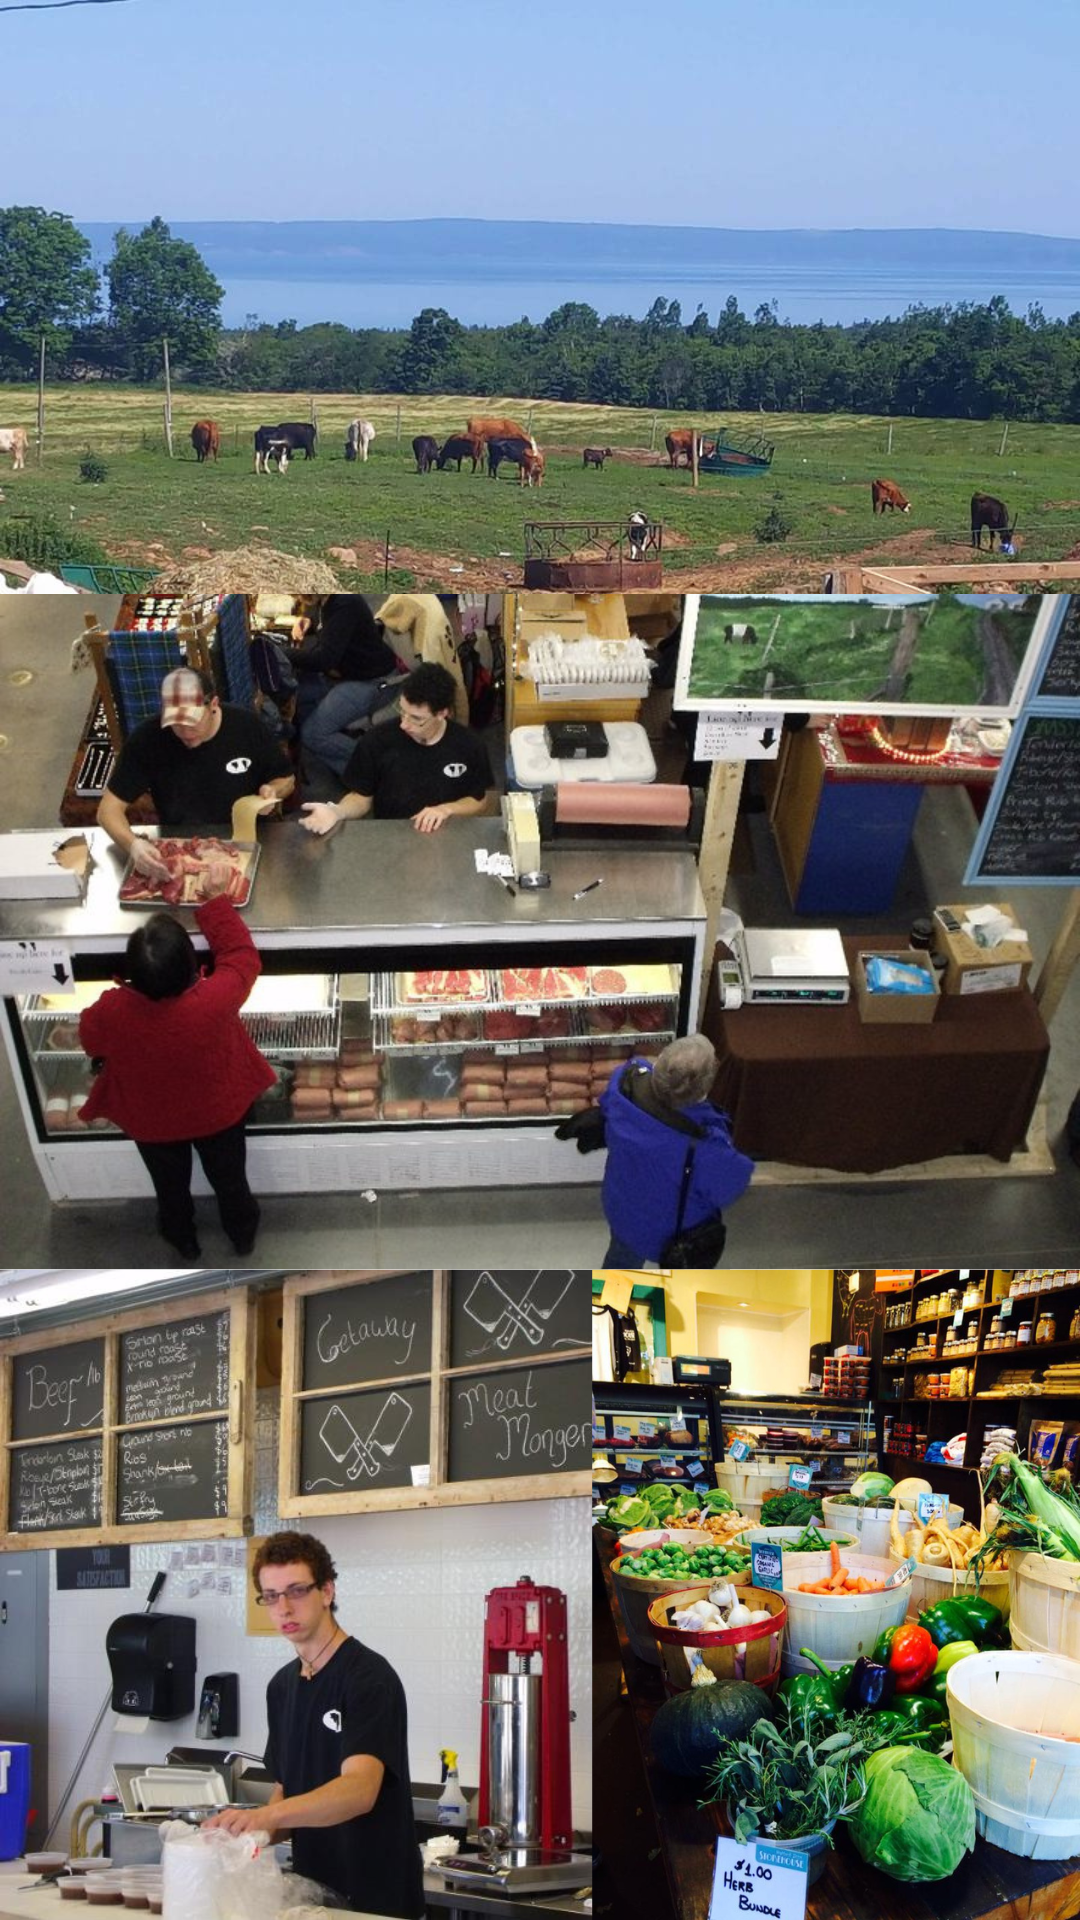 Collage of images showing cows at Getaway farms, Osprey's Roost selling at the market, and fruits and vegetables at the original store